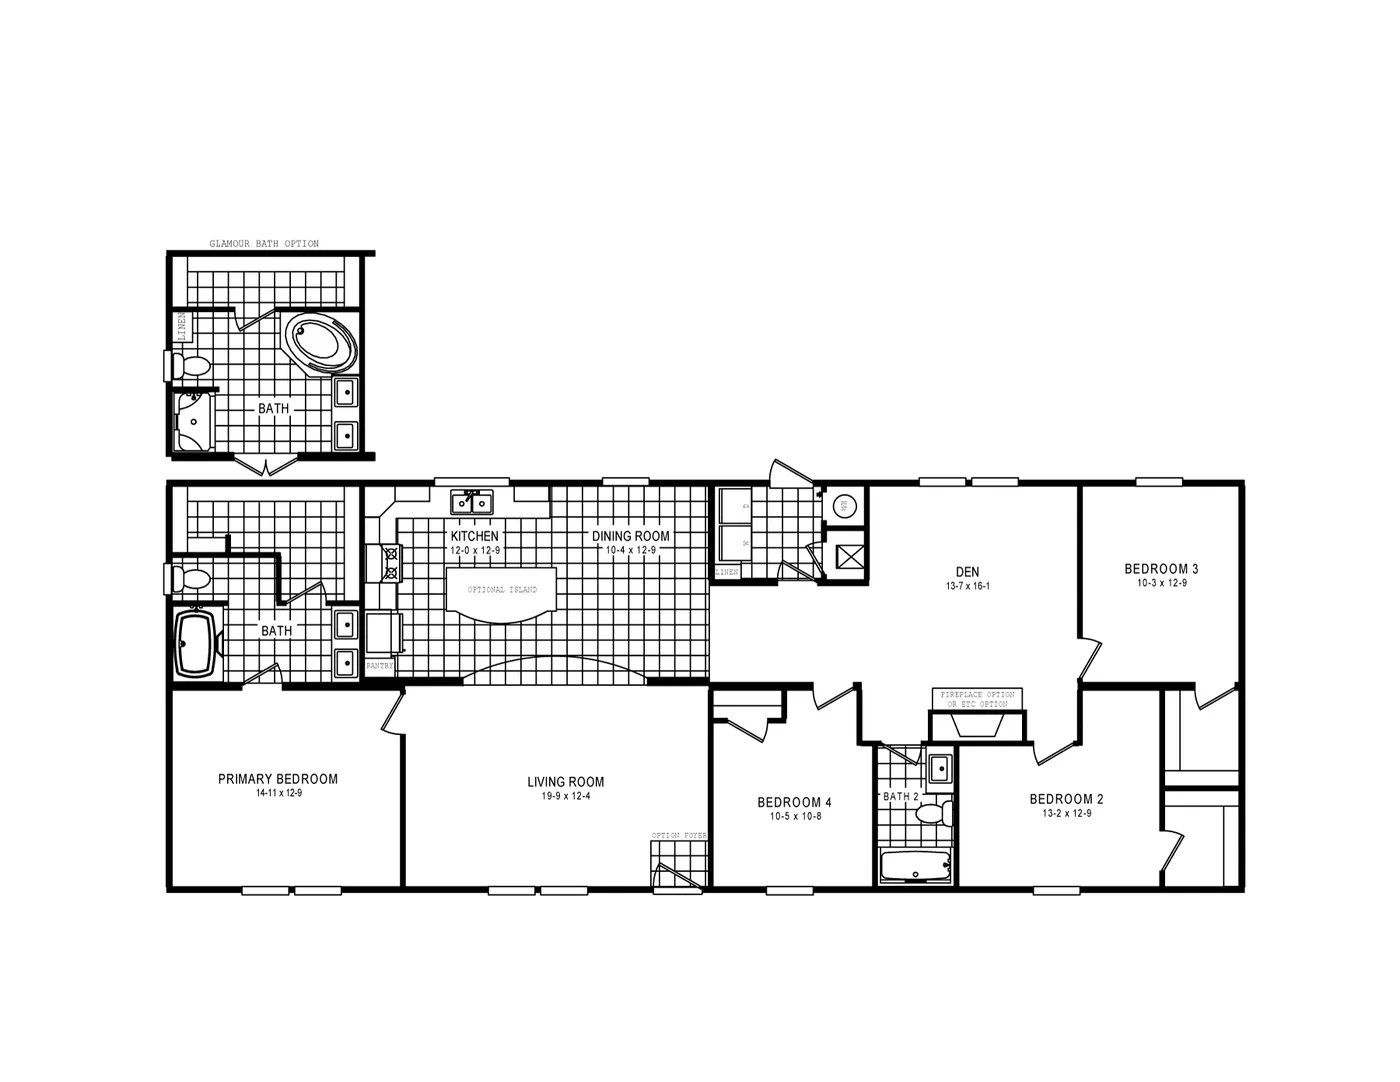 The 5602 ENTERPRISE 2 7028 Floor Plan. This Manufactured Mobile Home features 4 bedrooms and 2 baths.